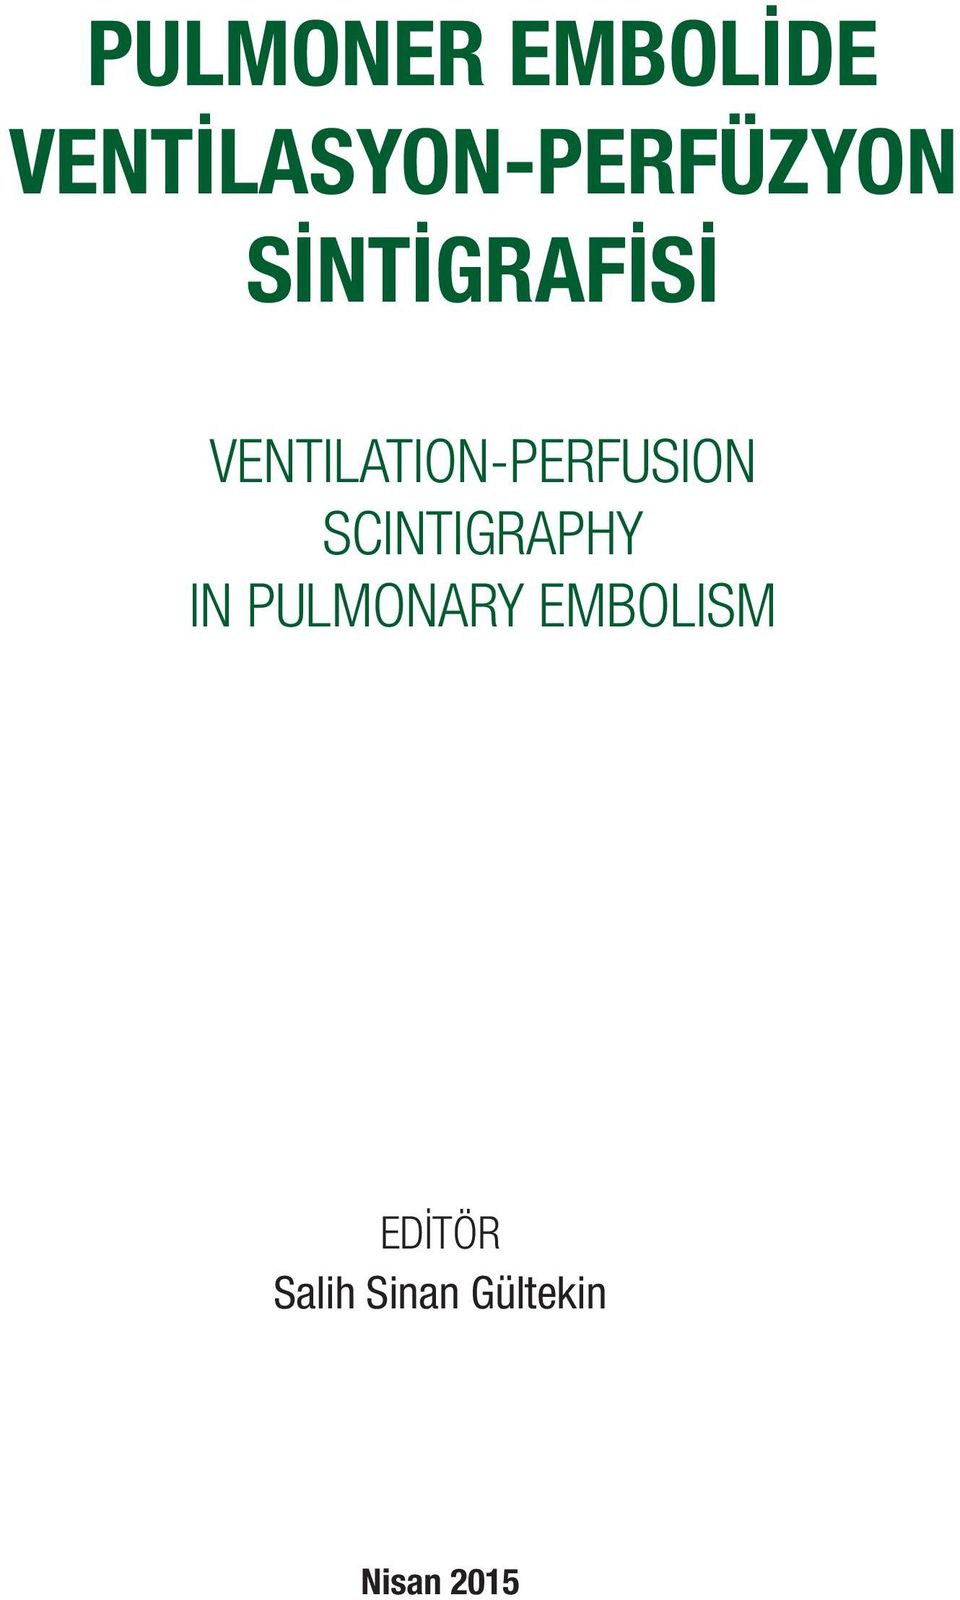 VENTILATION-PERFUSION SCINTIGRAPHY